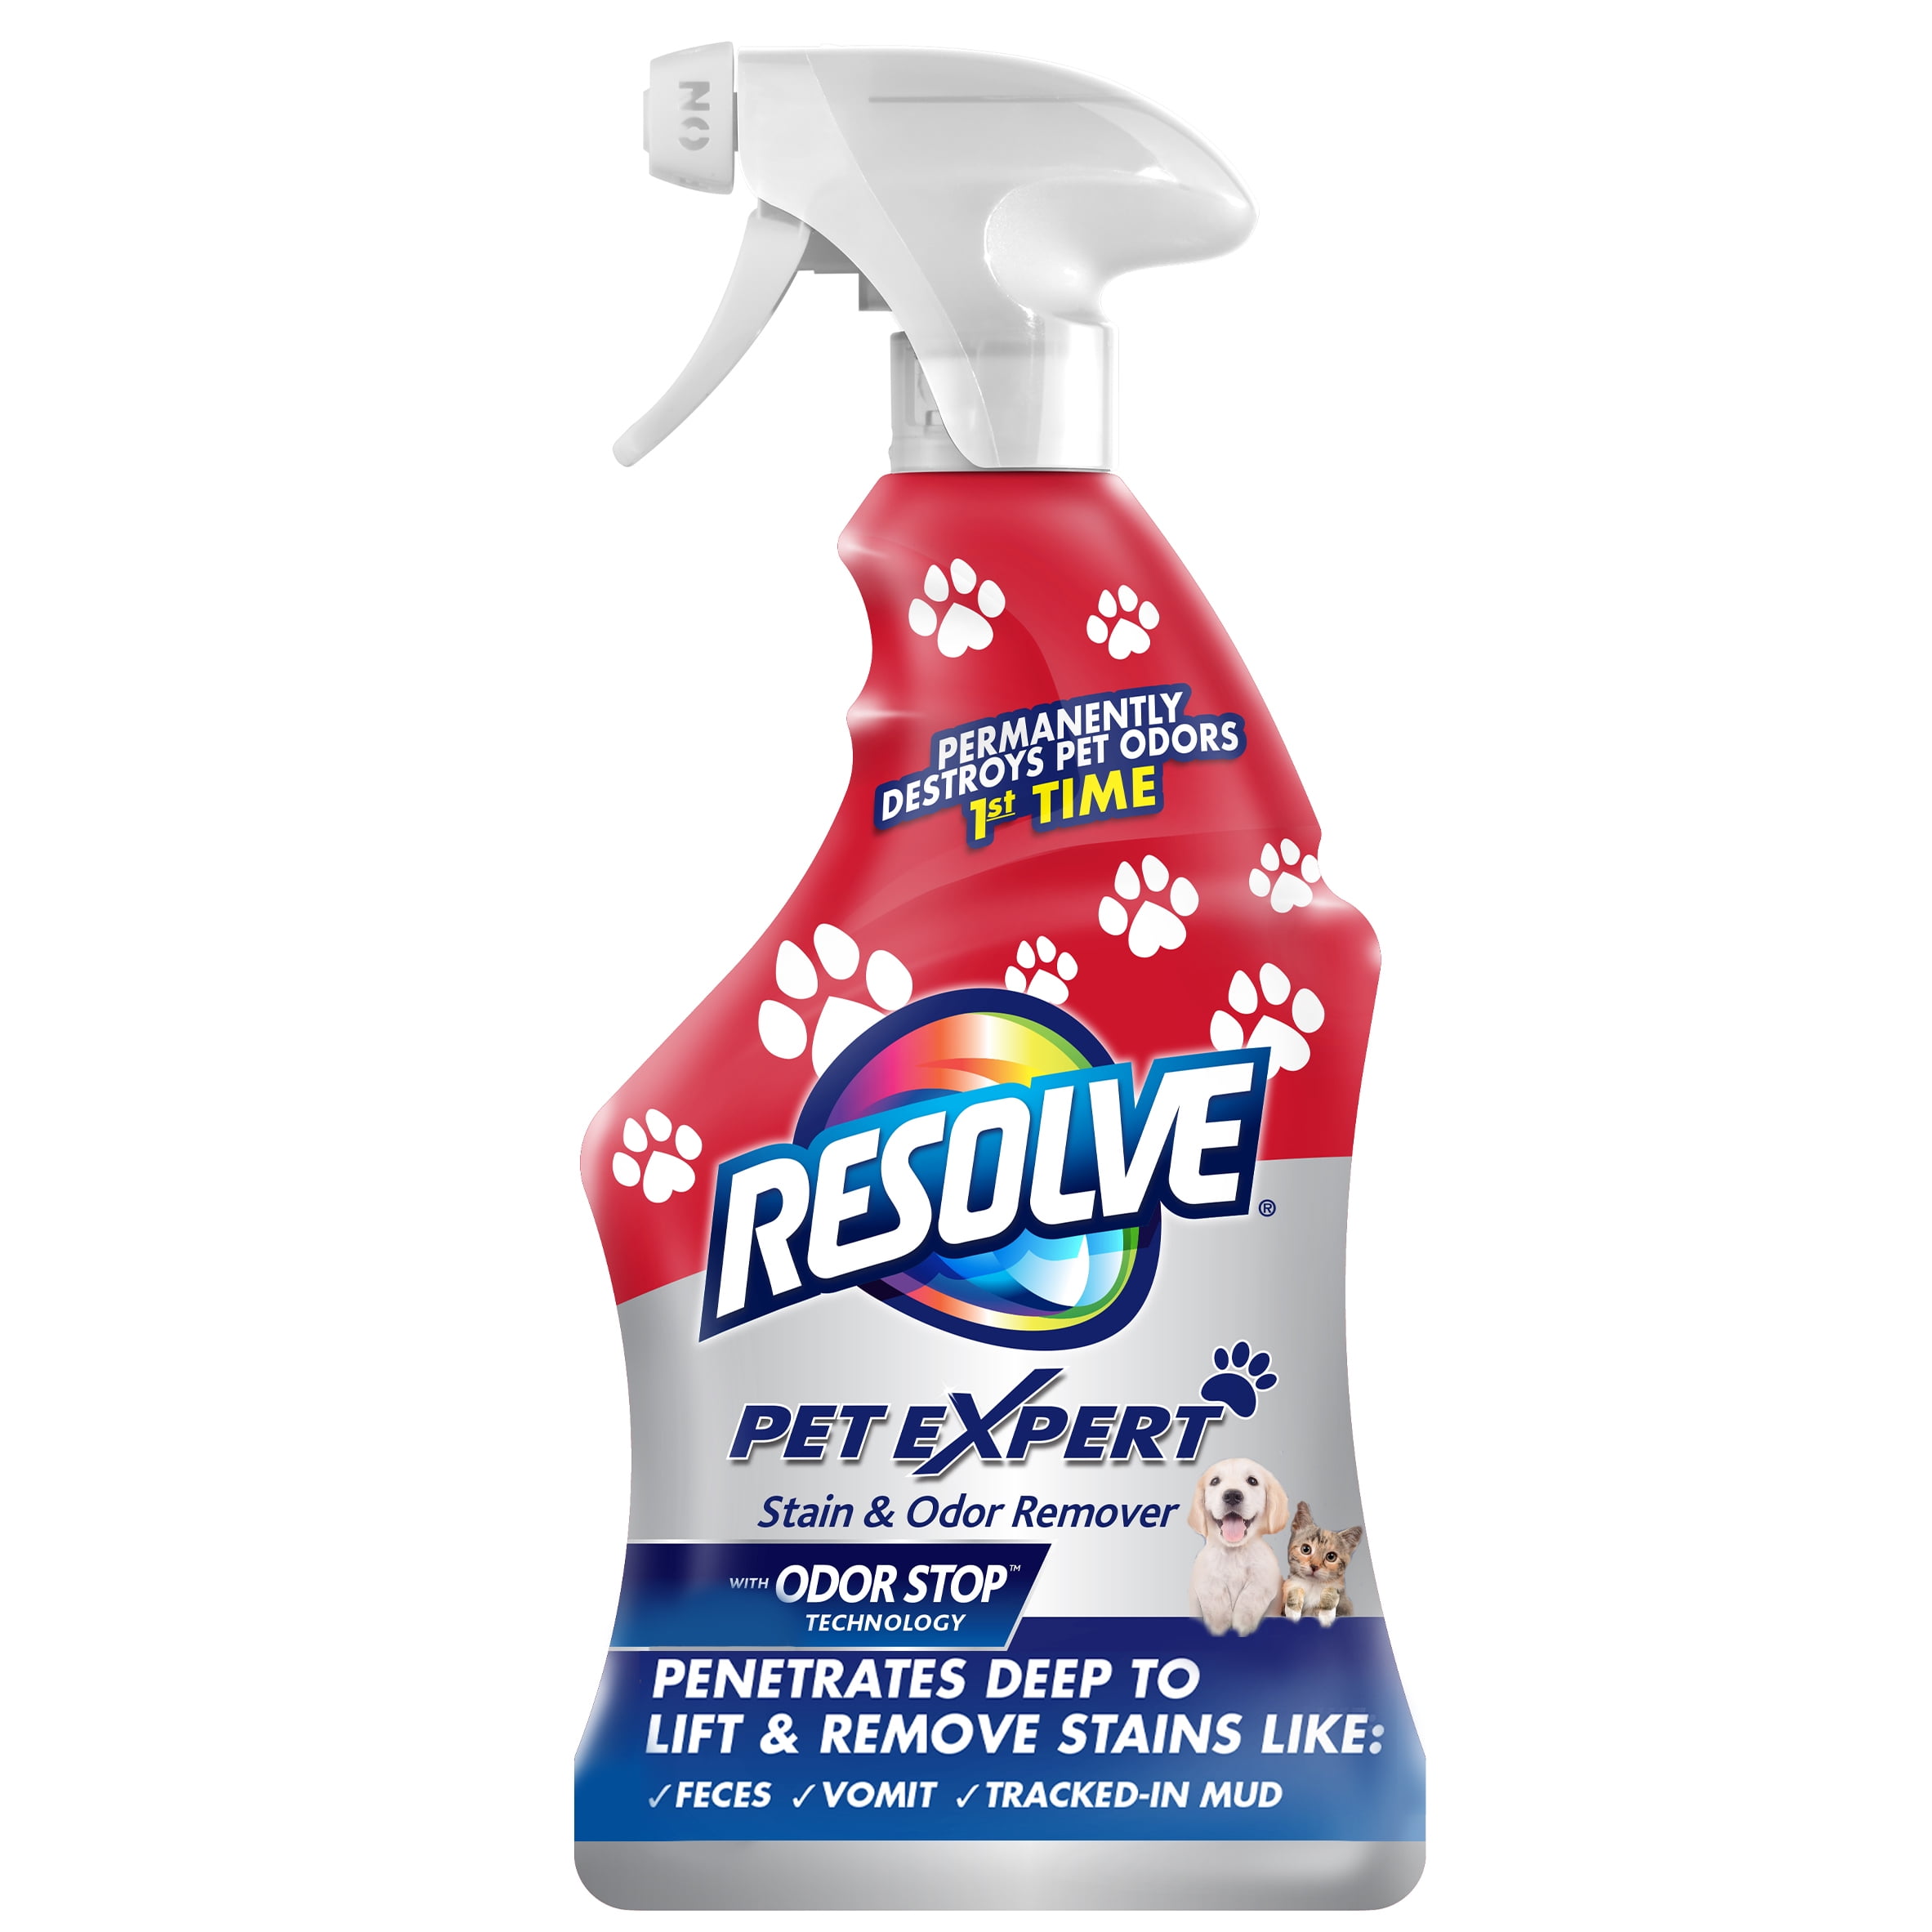 Hard Floor Pet Stain And Odor Remover, Pet Stain And Odor Remover For Hardwood Floors